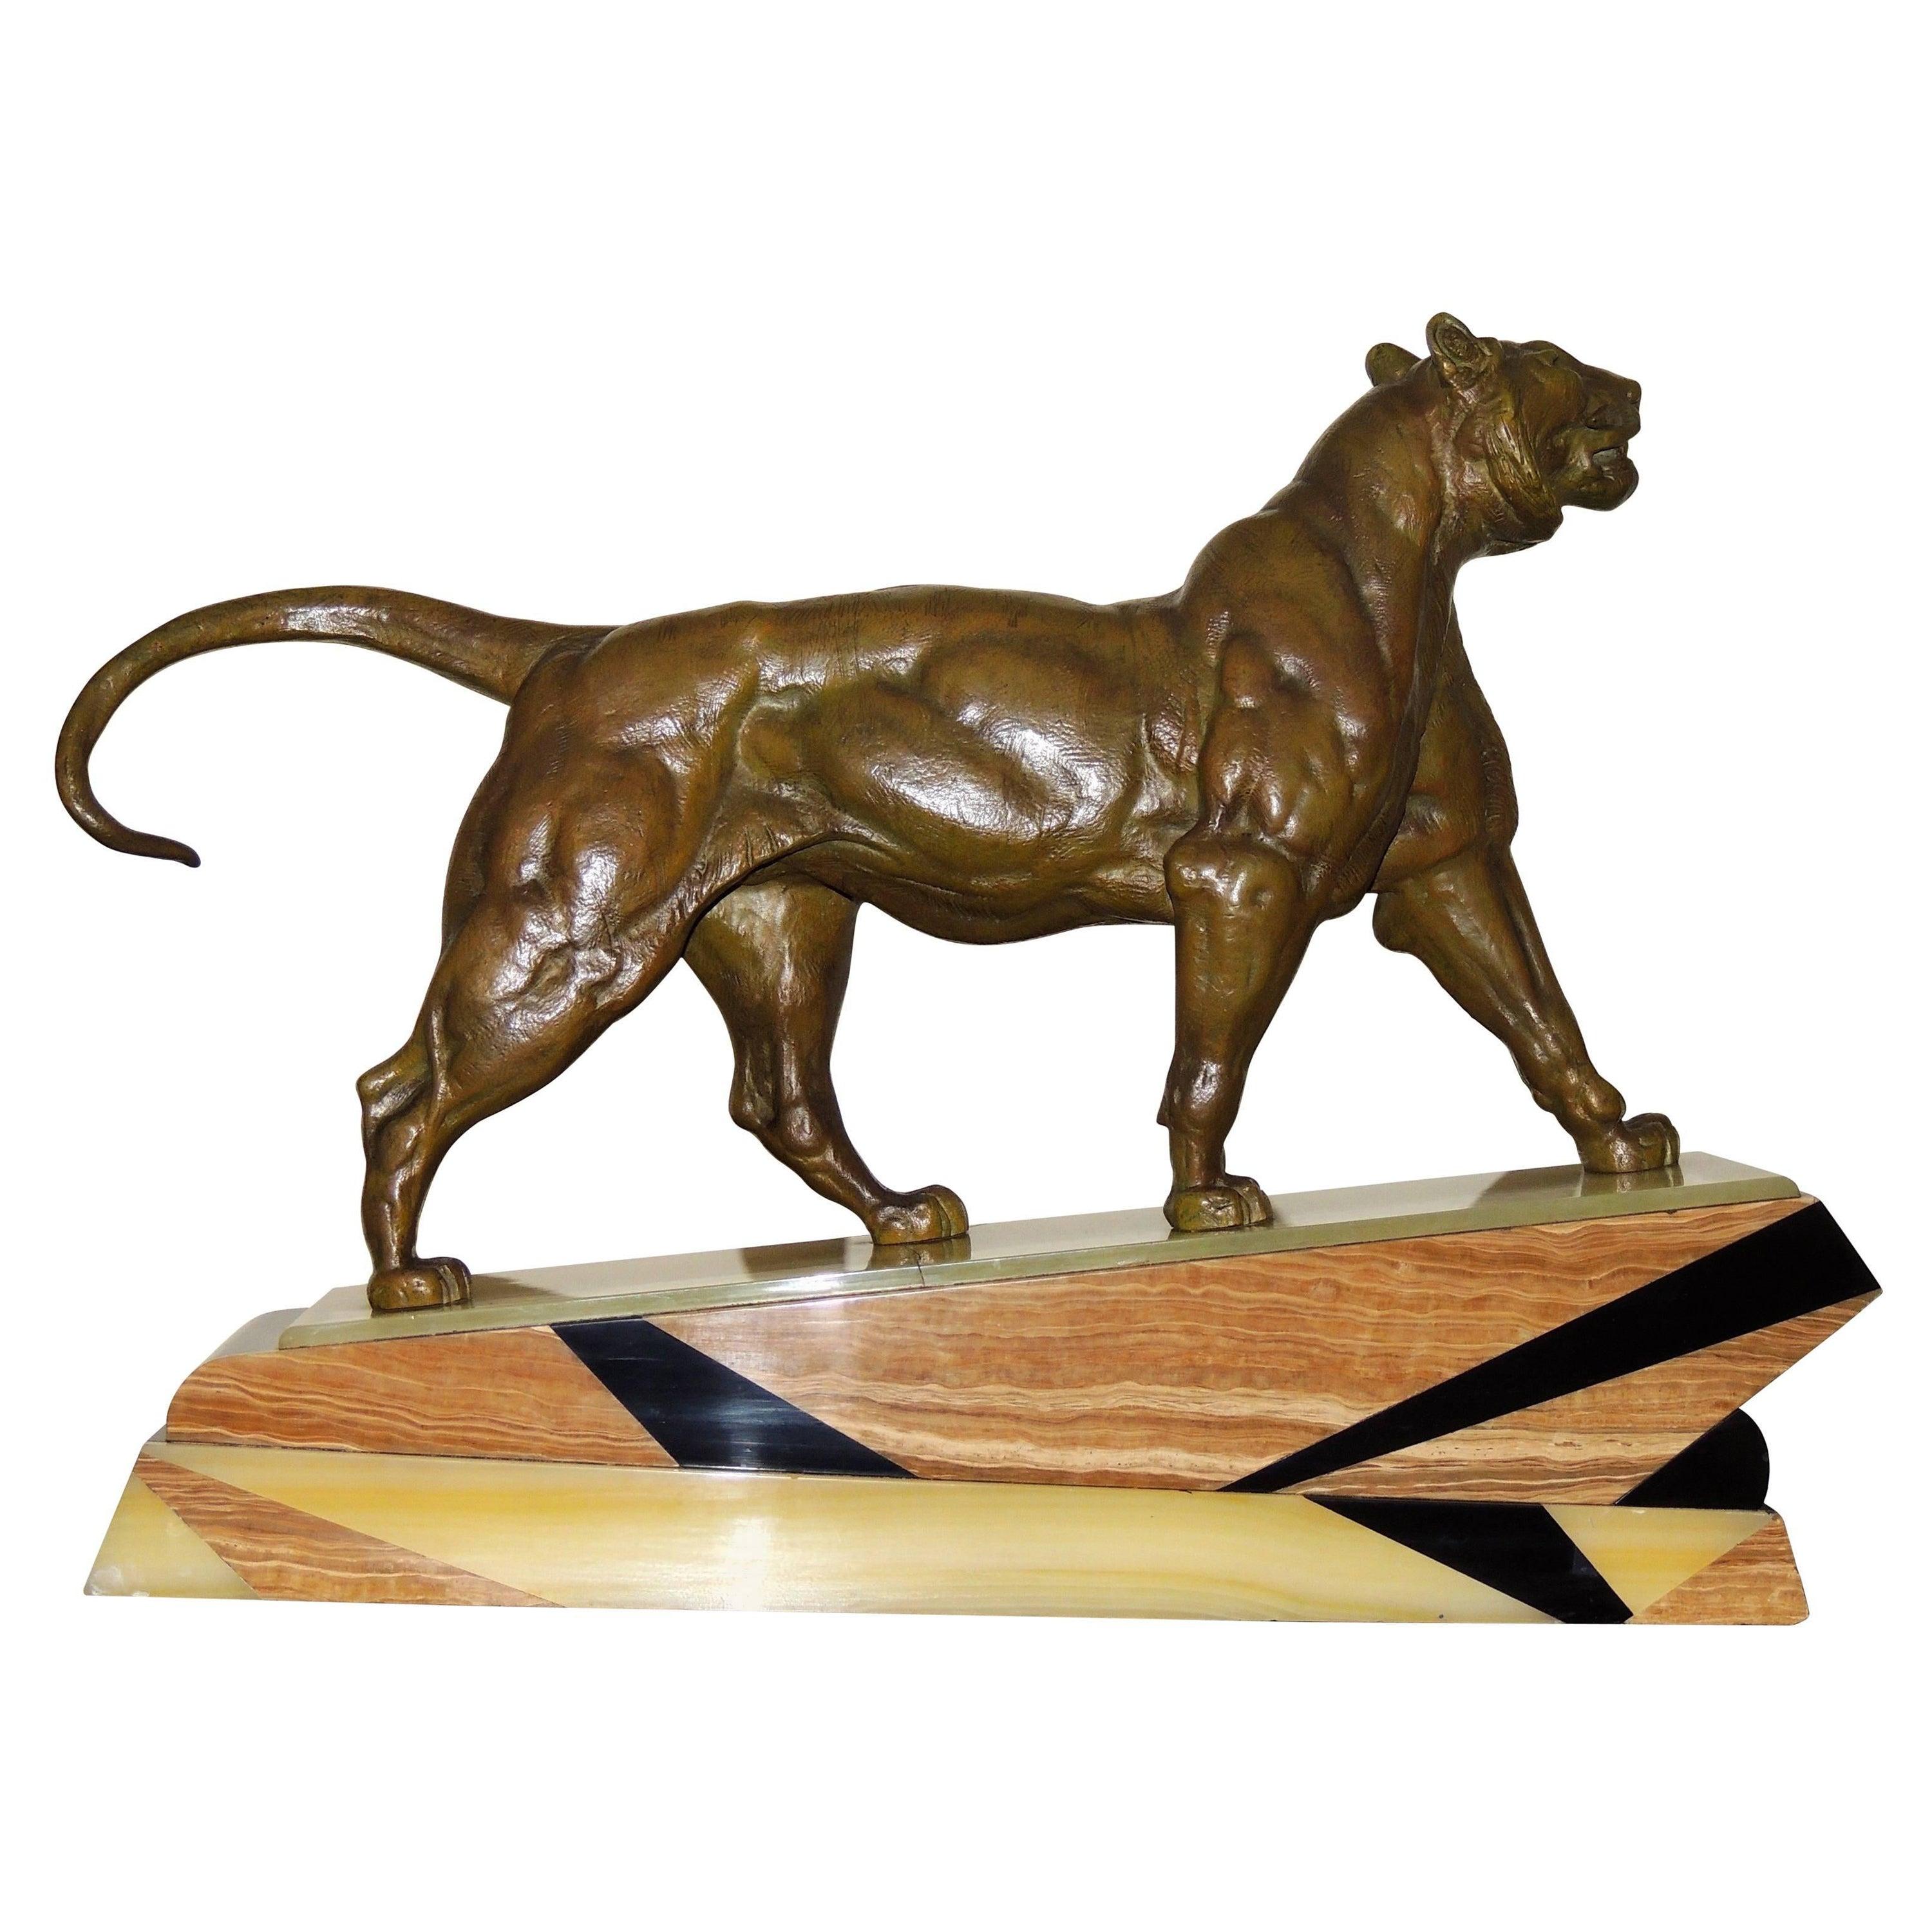 This is an Art Deco bronze statue of a lion with a great marble base of three tones inlaid in geometric shapes. The lion is powerfully rendered, and its expression and musculature are well-defined.

Throughout history, the Lion has been known as the